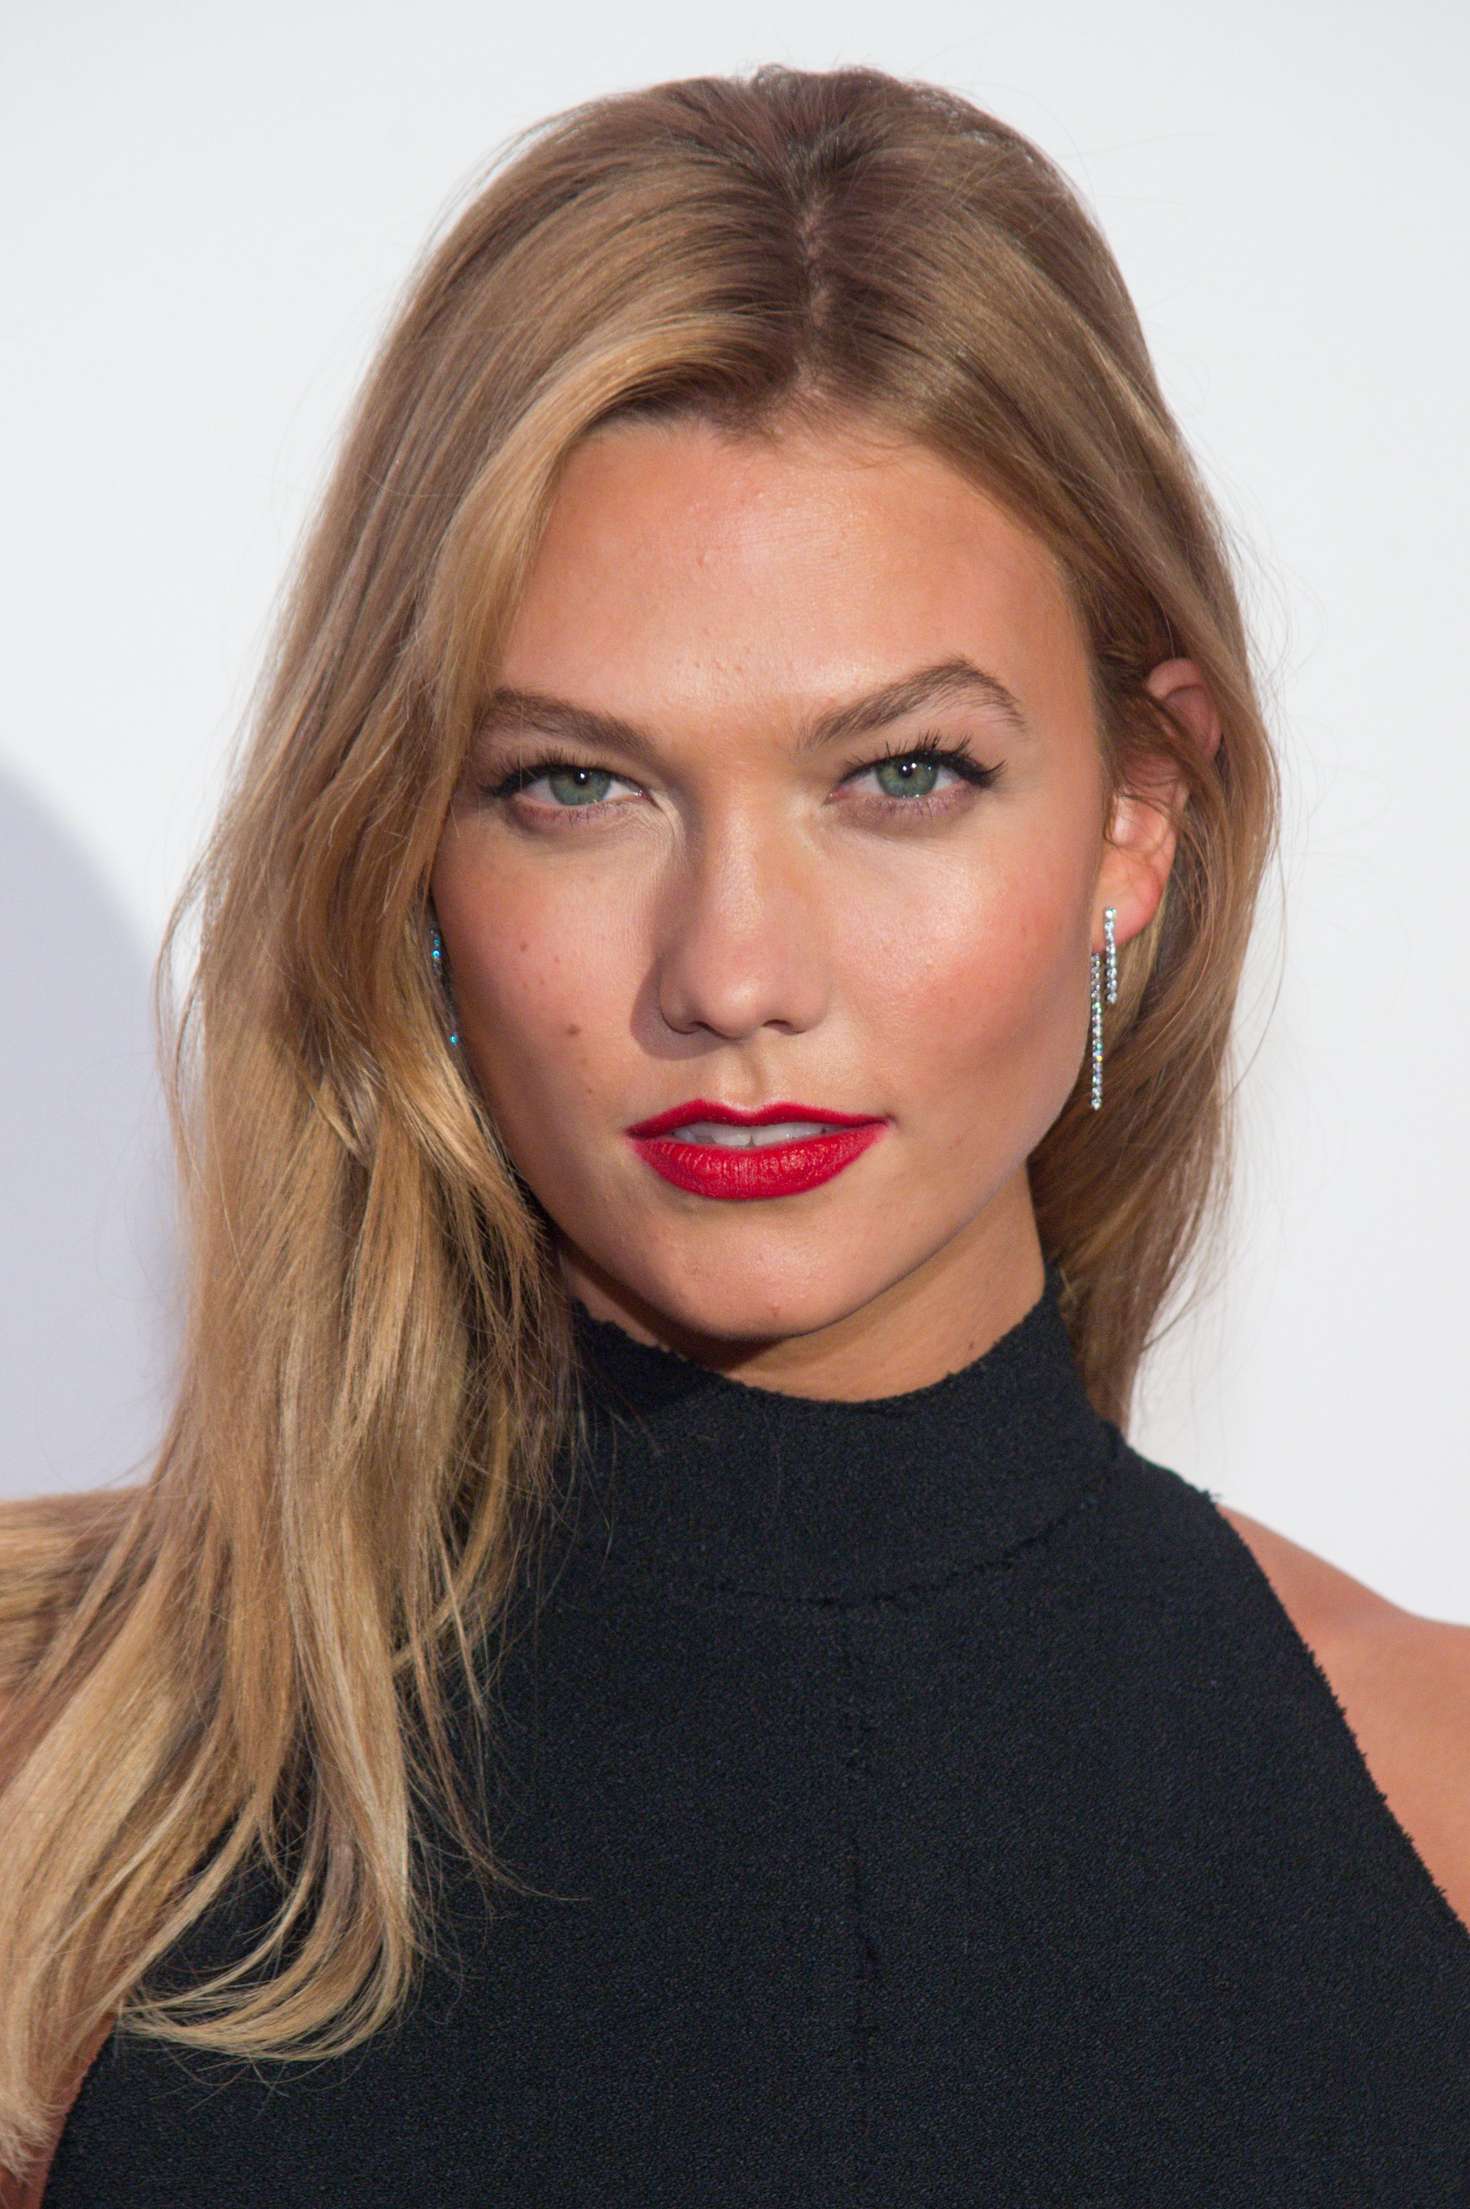 Karlie Kloss photo 1667 of 3171 pics, wallpaper - photo #854961 - ThePlace2